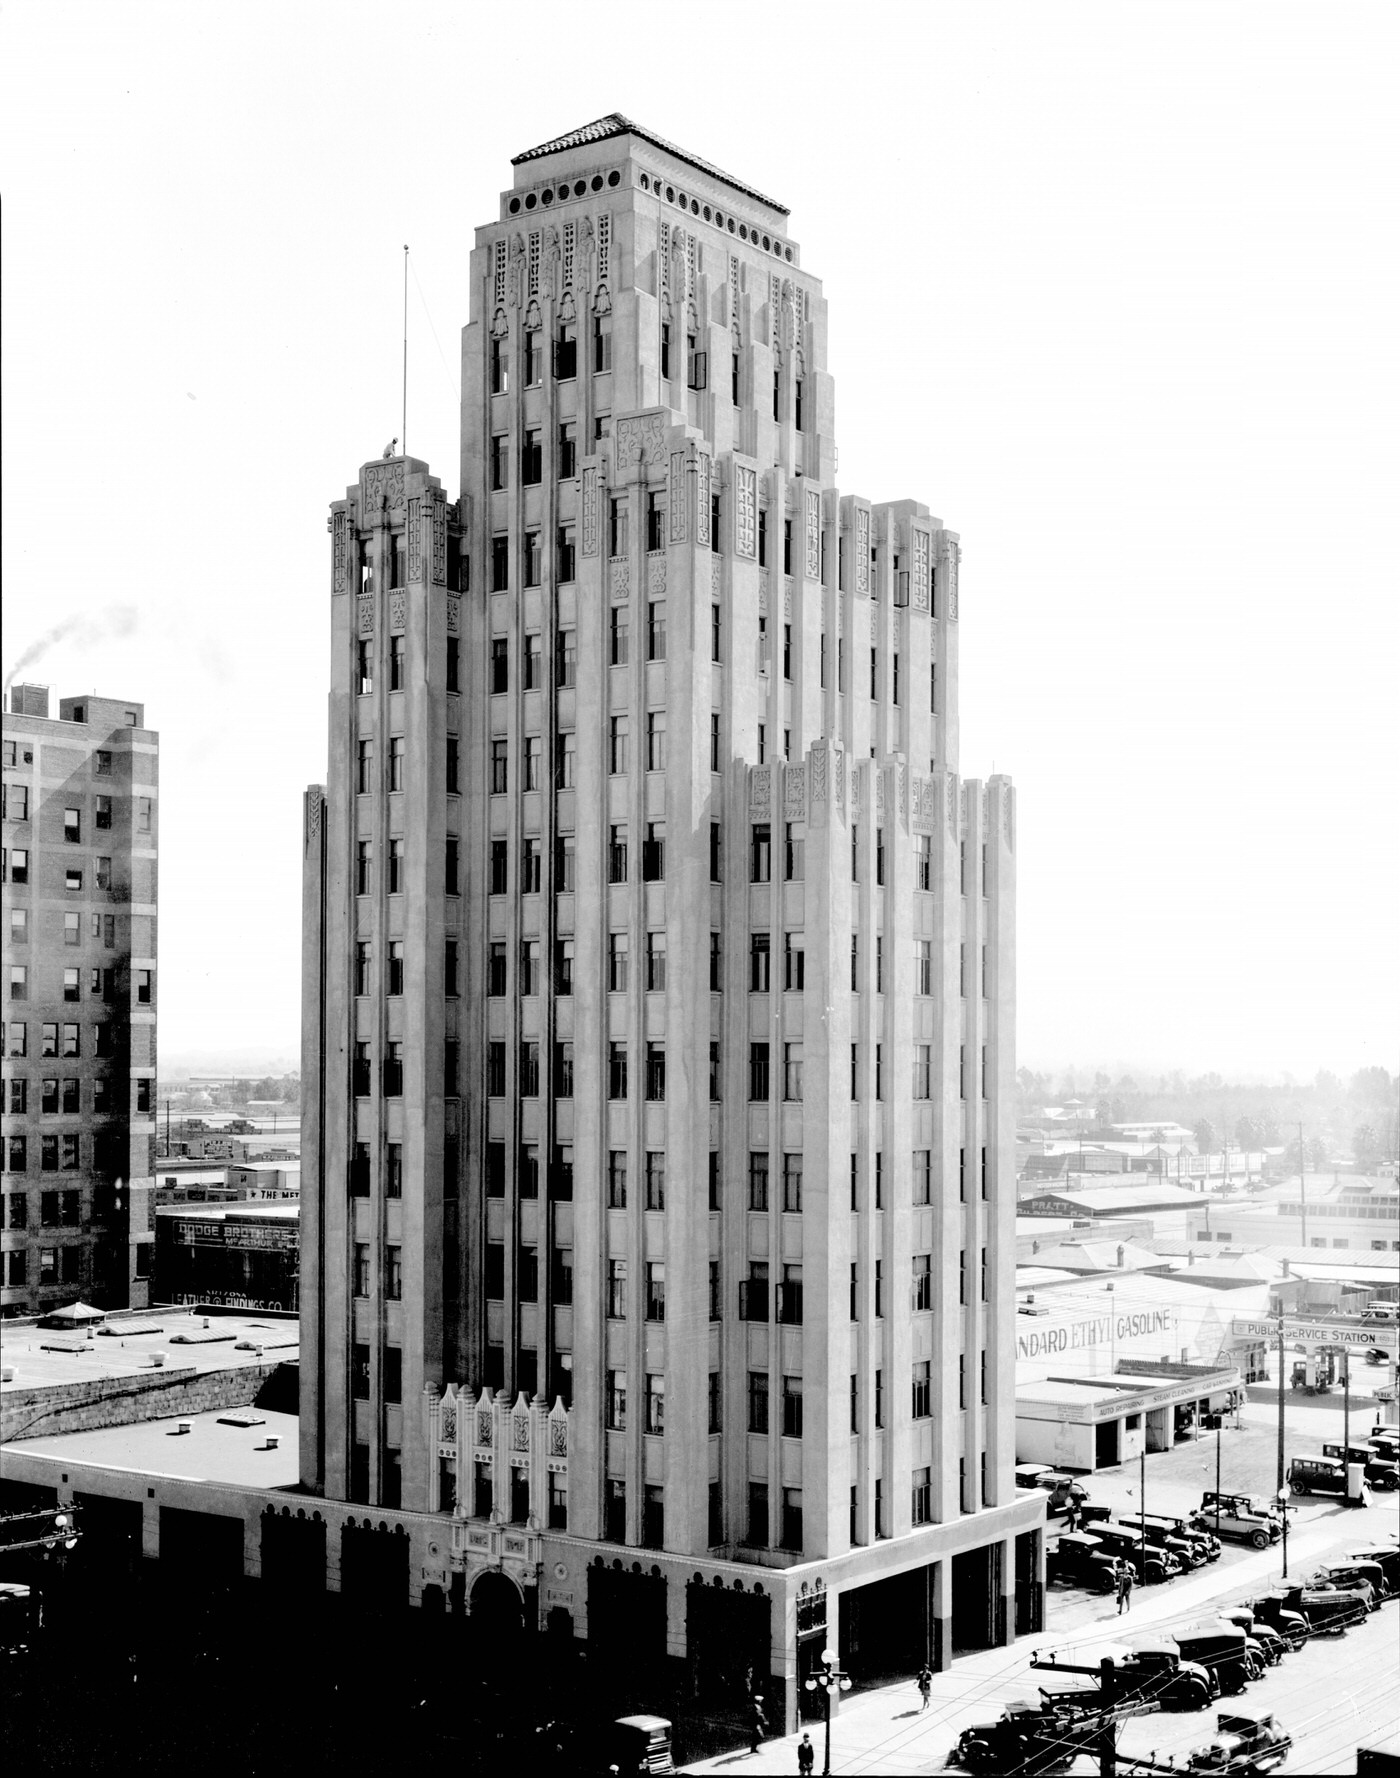 Luhrs Tower Exterior, 1930s. The Luhrs Tower stands at First Ave. and Jefferson St. in Phoenix.